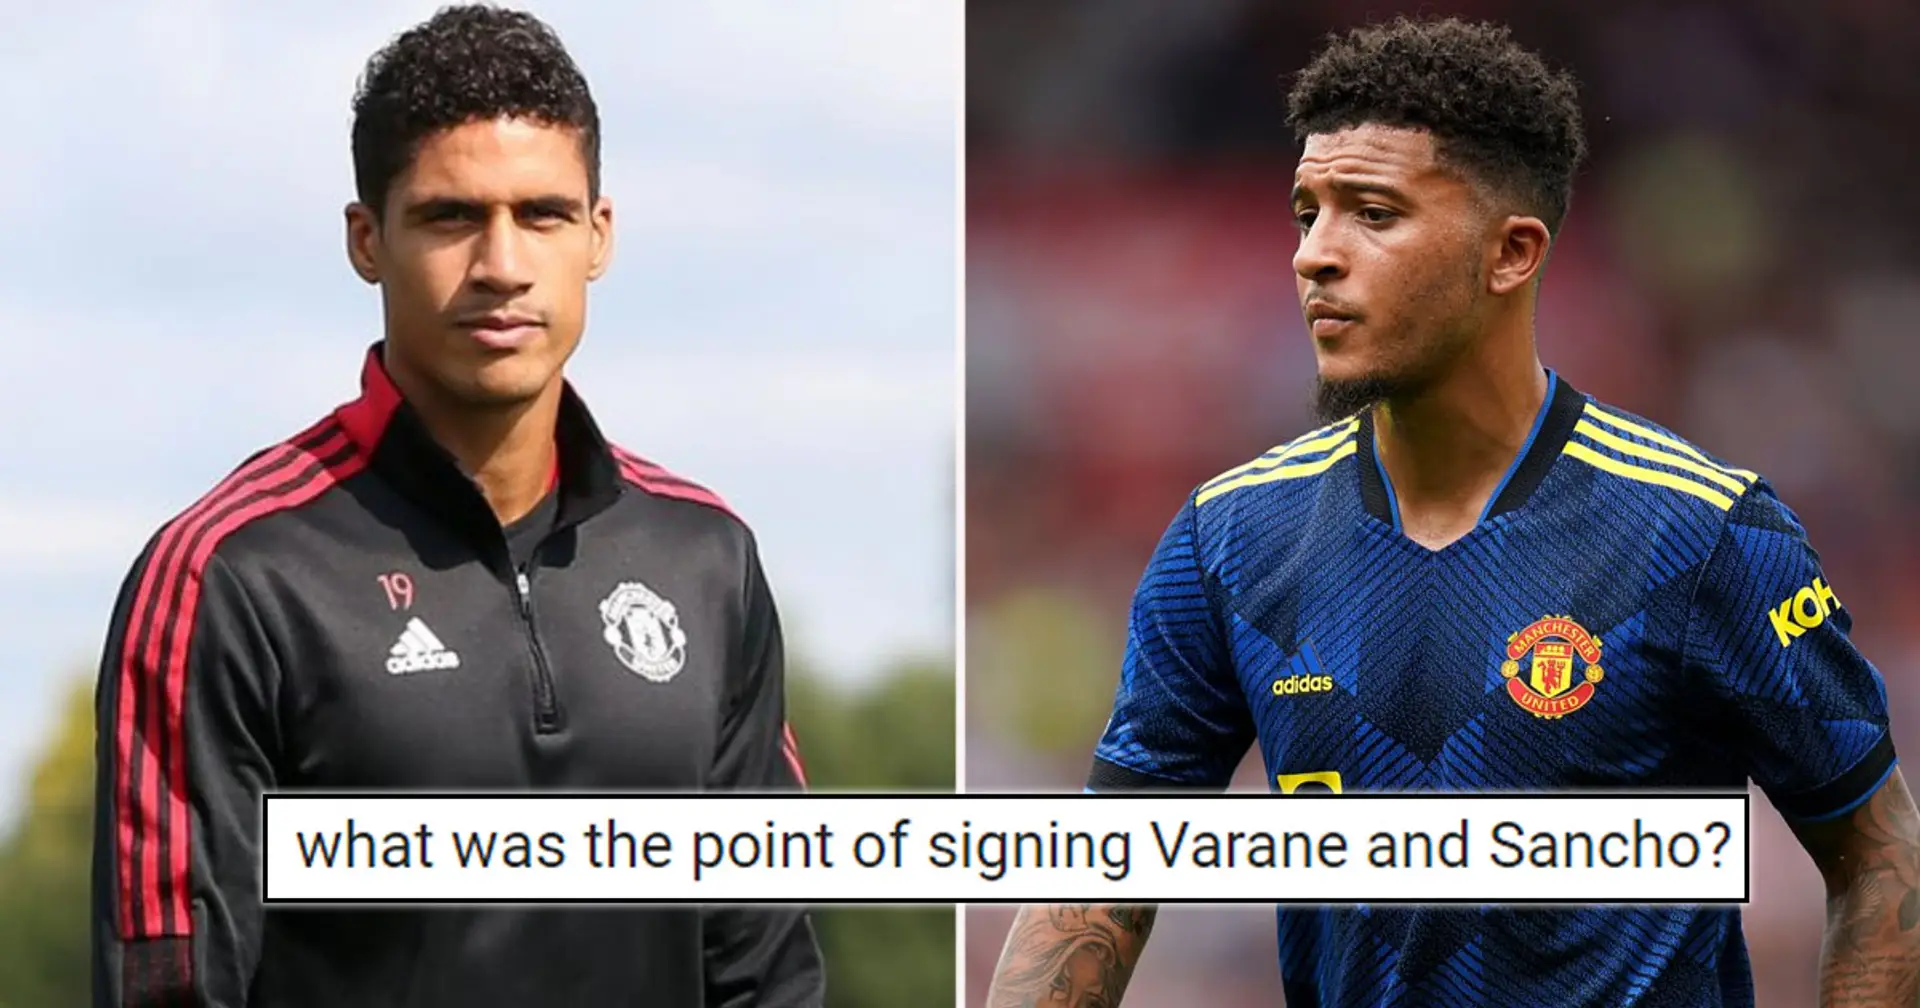 What was the point of signing Sancho and Varane? You asked, we answer